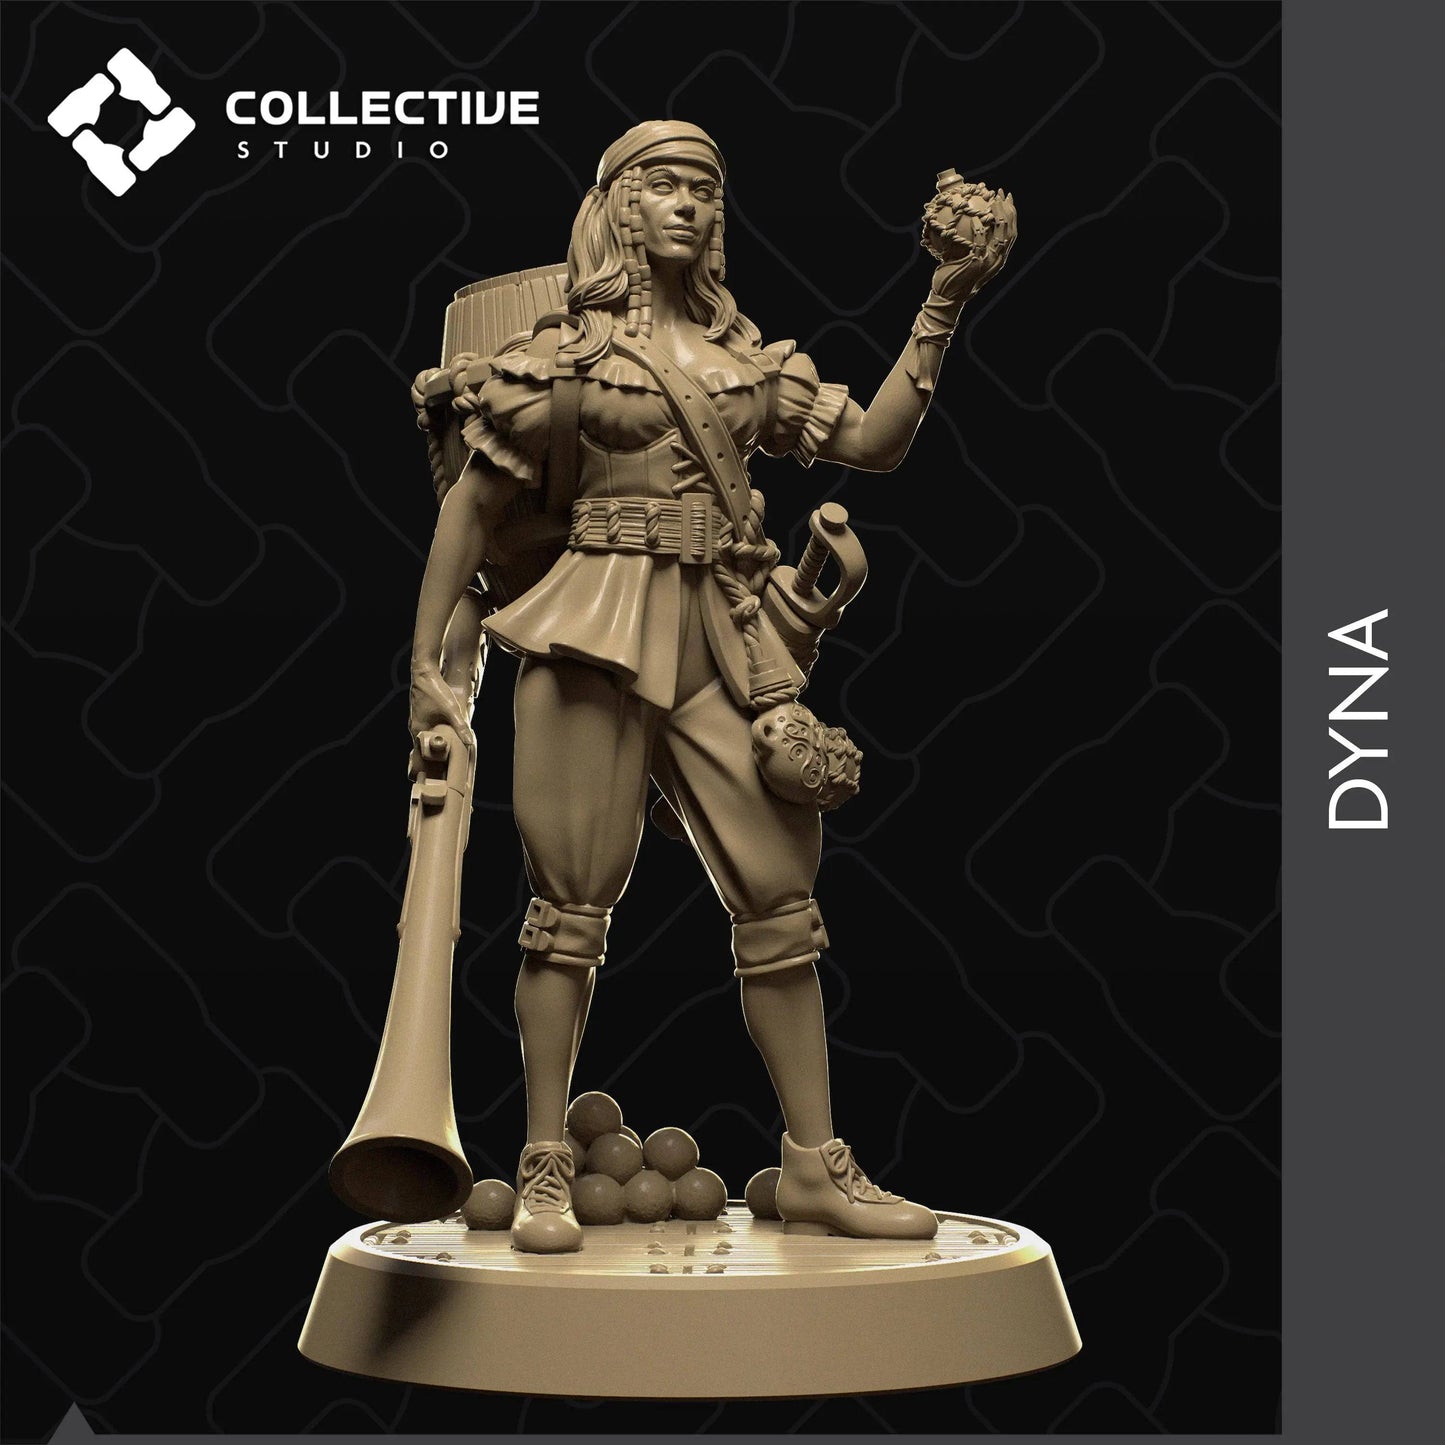 Dyna | Pirate Explosives Expert With Blunderbuss and Barrel | D&D TTRPG Character Miniature | Collective Studio - Tattles Told 3D